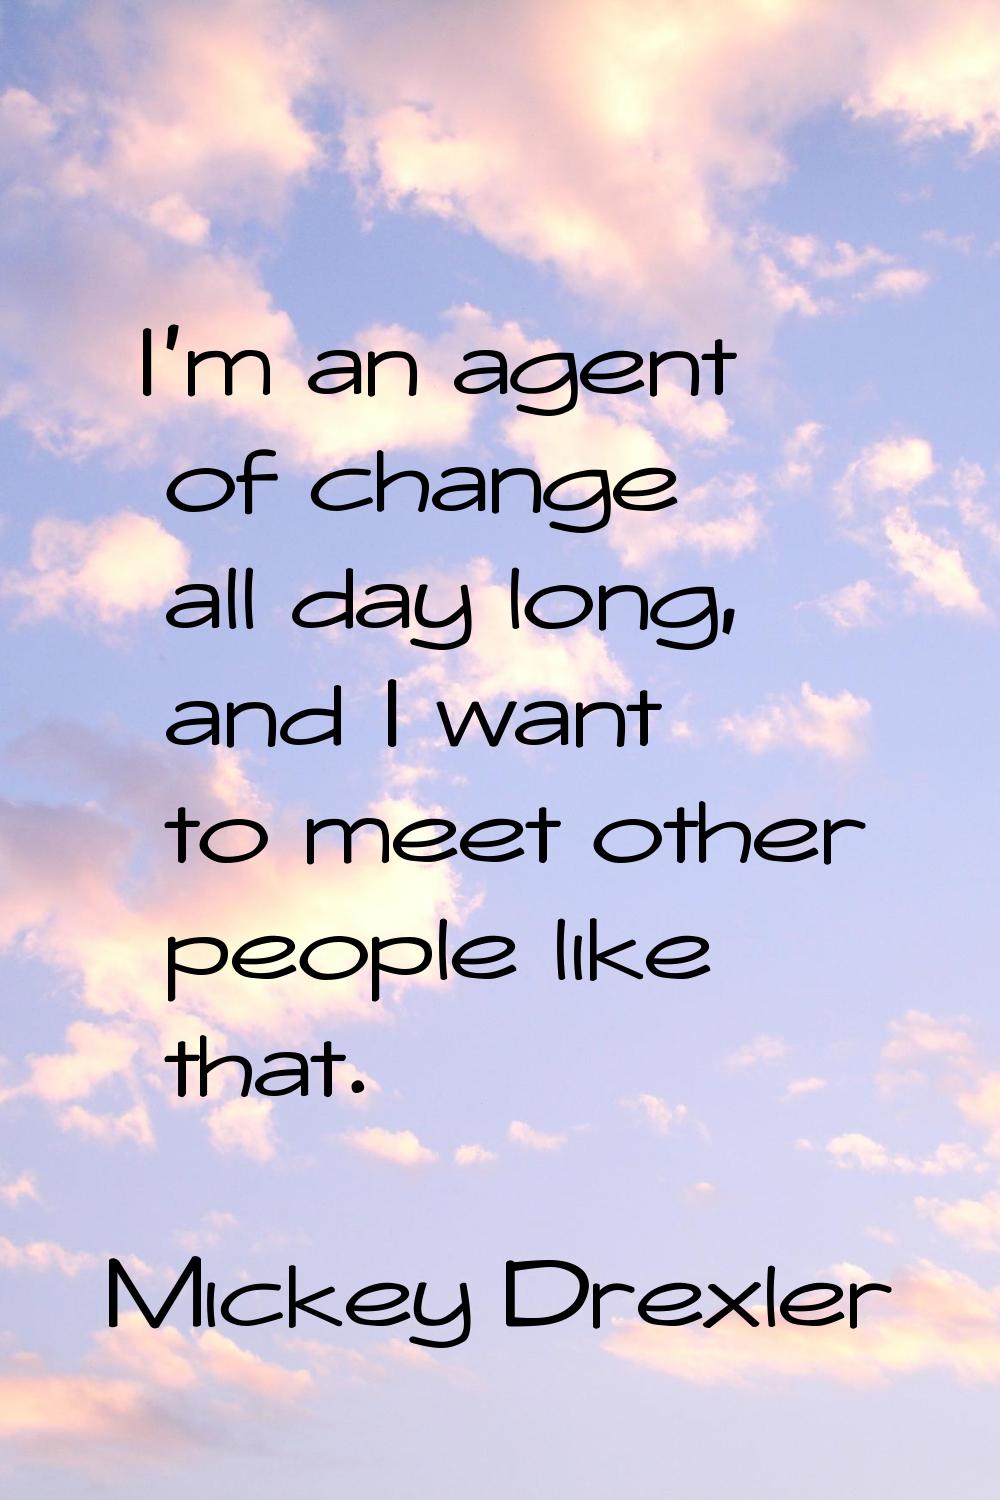 I'm an agent of change all day long, and I want to meet other people like that.